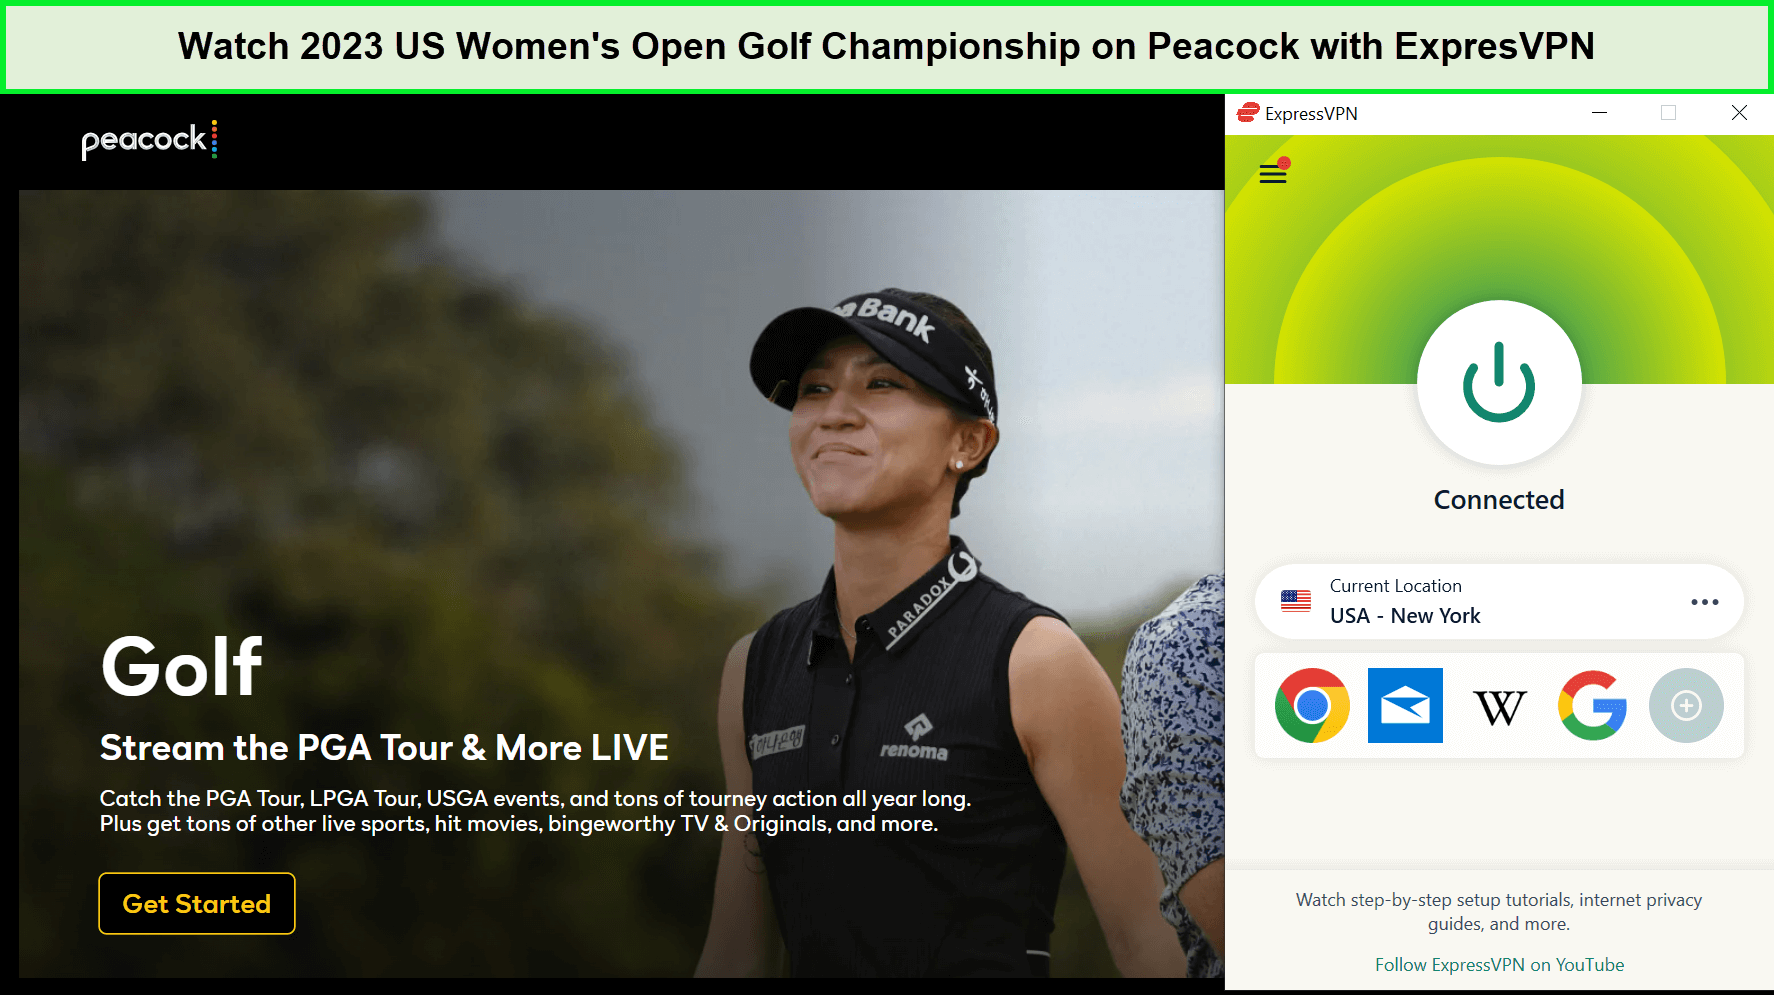 Watch-2023-US-Womens-Open-Golf-Championship-in-Netherlands-on-Peacock-with-ExpresVPN